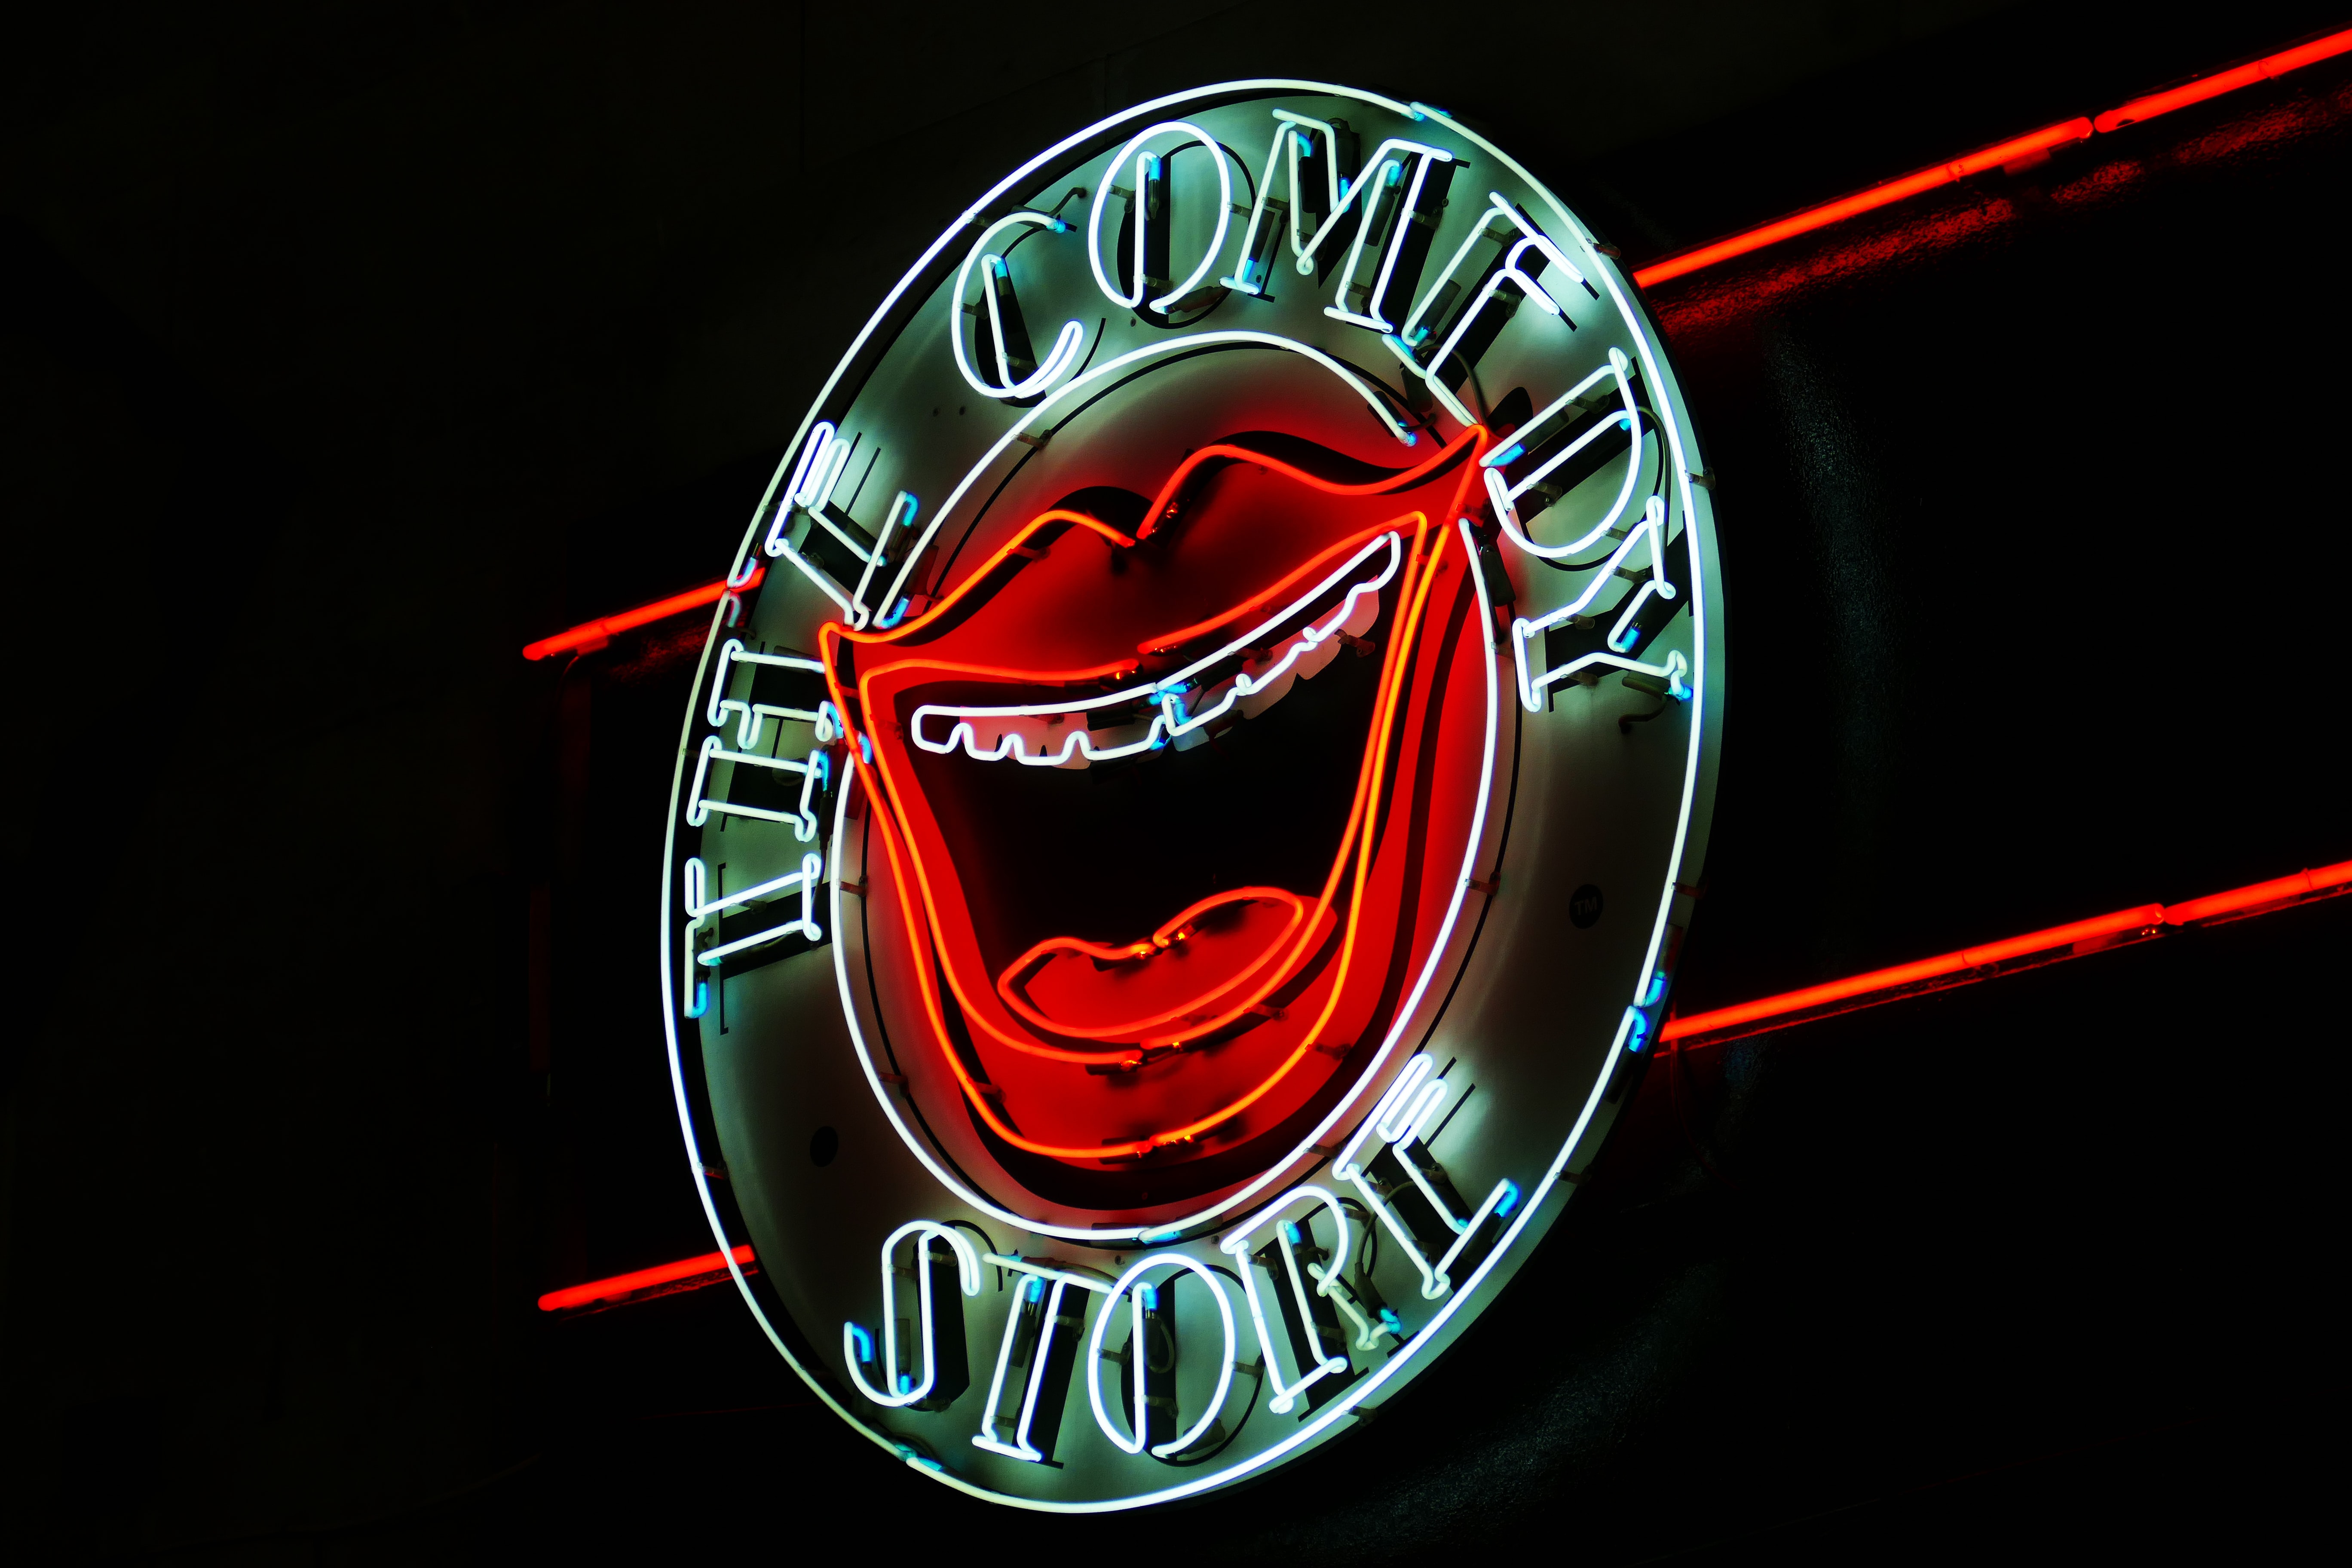 A light up wall decoration with the words The Comedy Store illuminated.